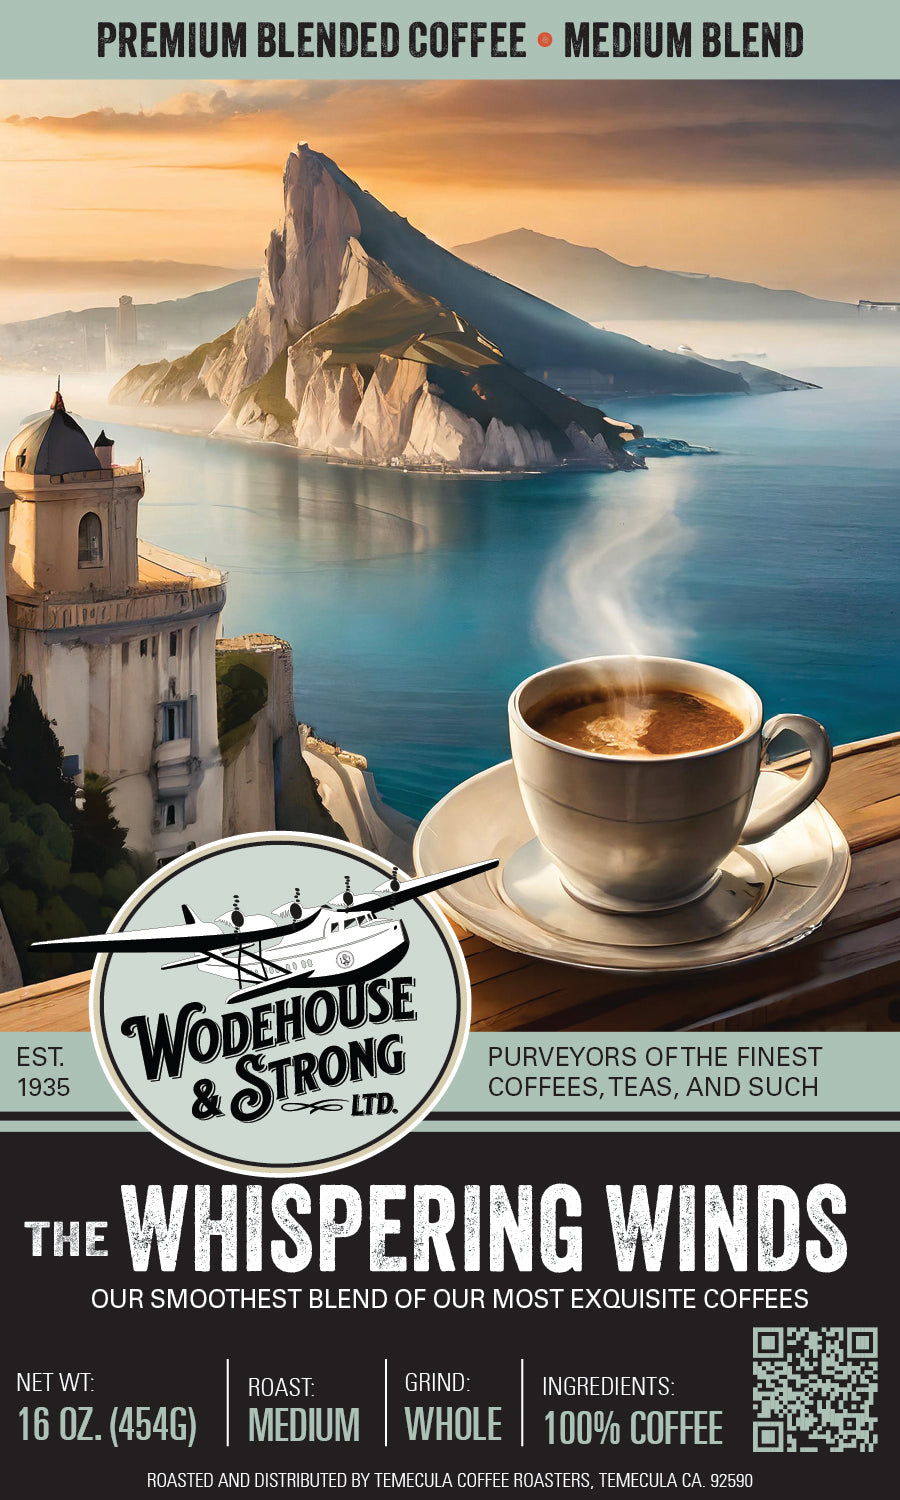 The Whispering Winds – Our smoothest coffee! (Medium blend, medium roast)